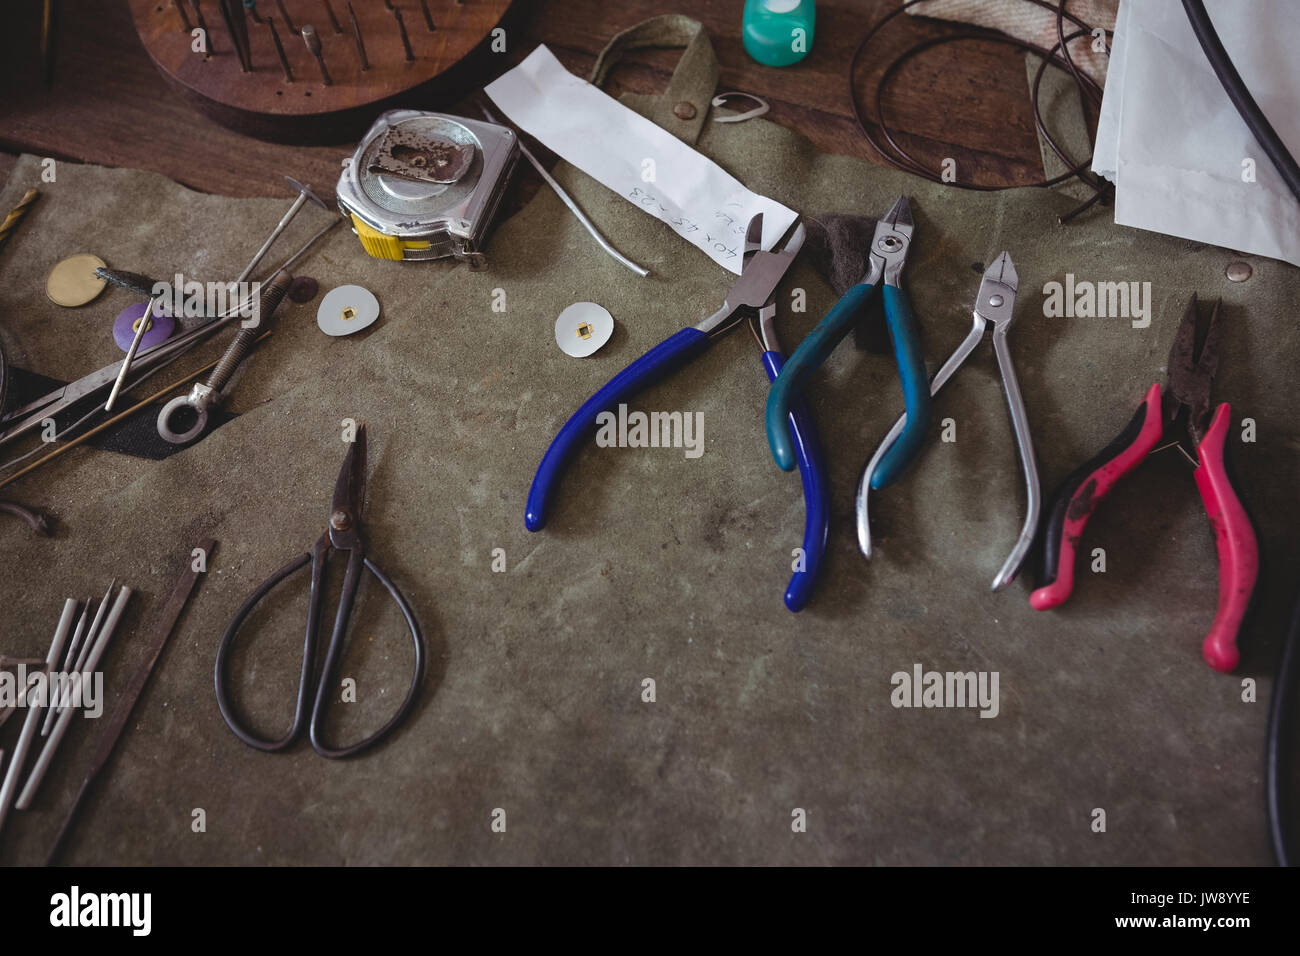 Various metal tools on wooden table in workshop Stock Photo